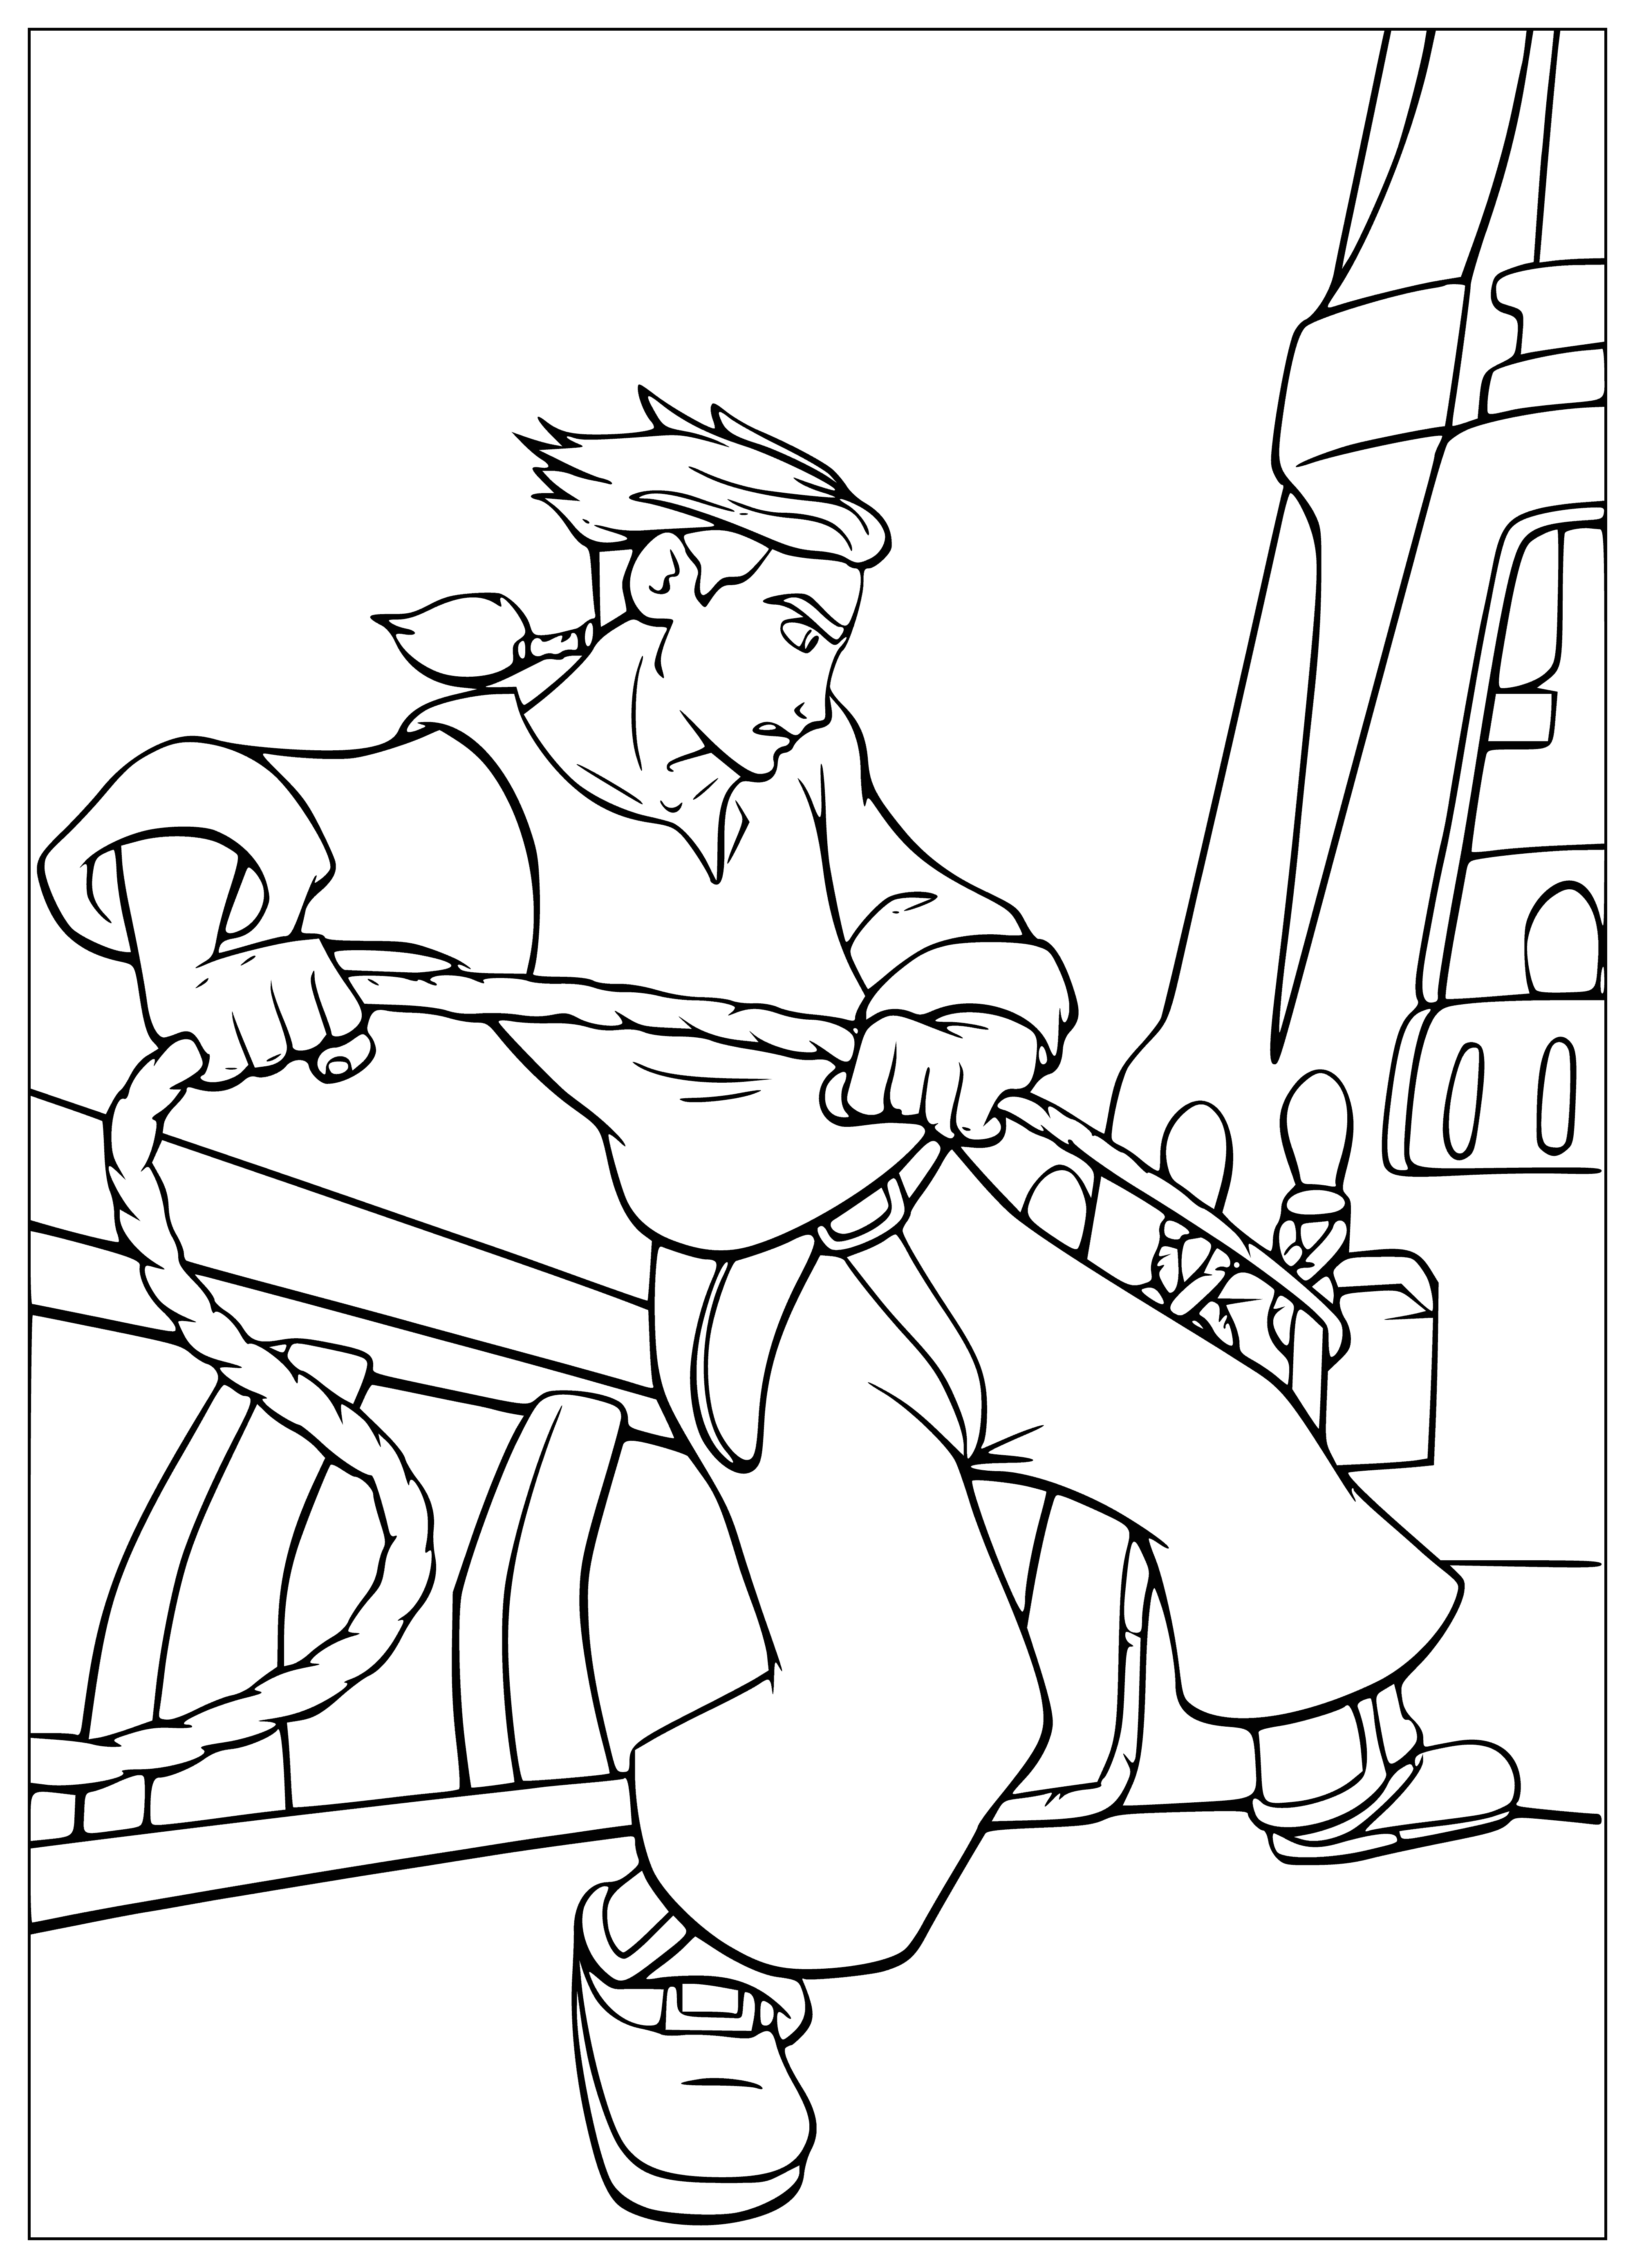 coloring page: Jimm is on the Treasure Planet, securing a golden chest with a map of the universe inside.